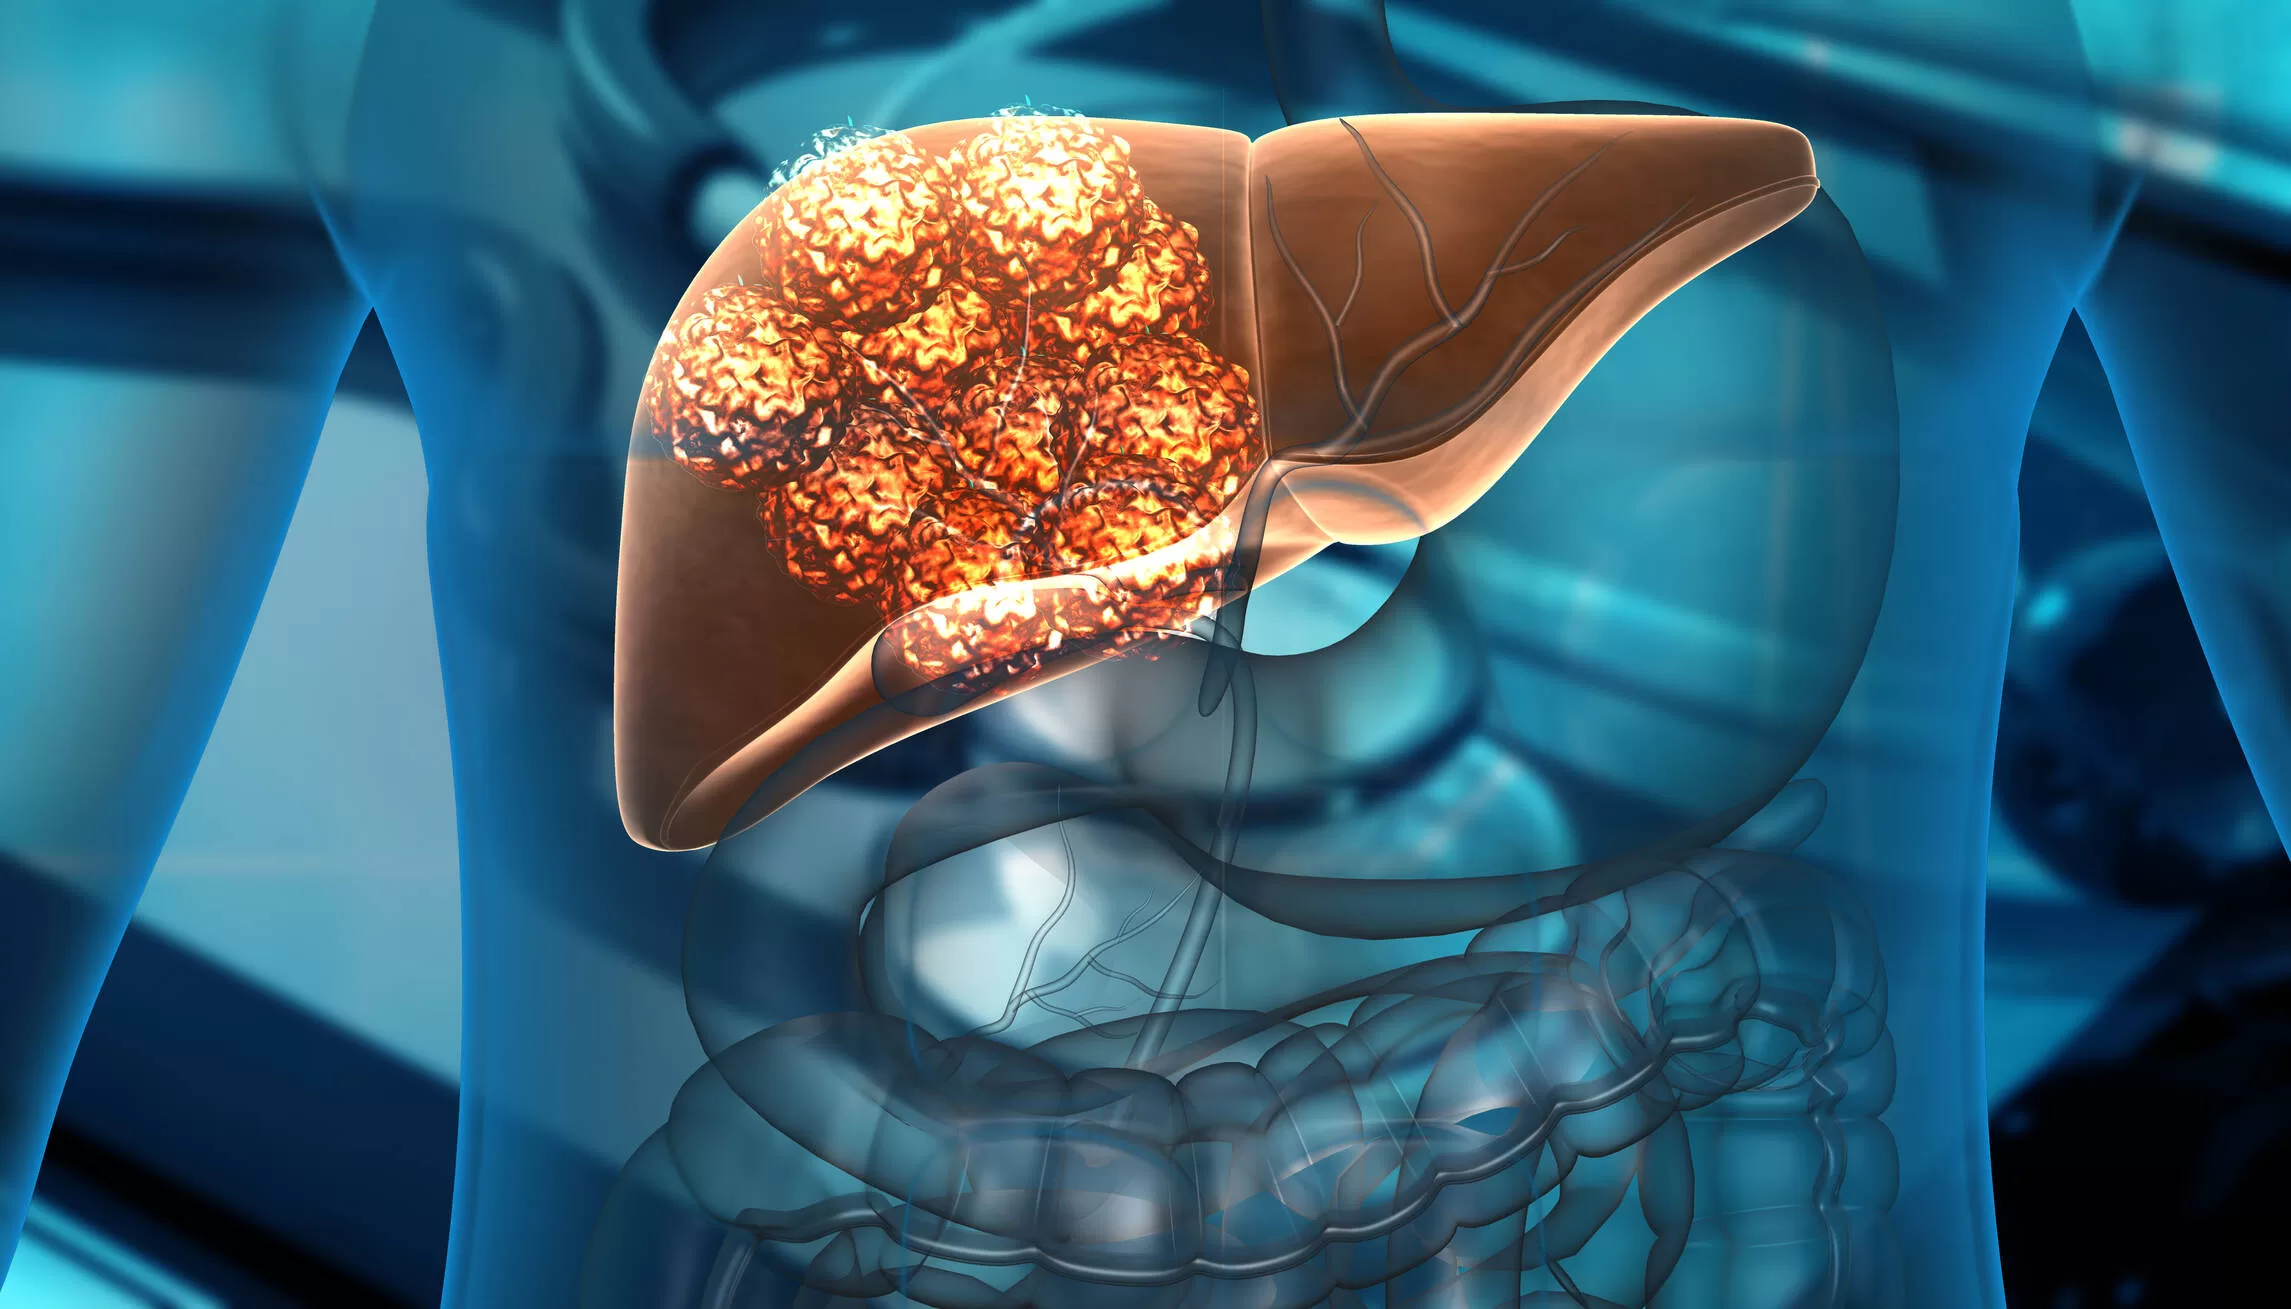 They create a 'humanized' liver in mice that could shed light on serious diseases
